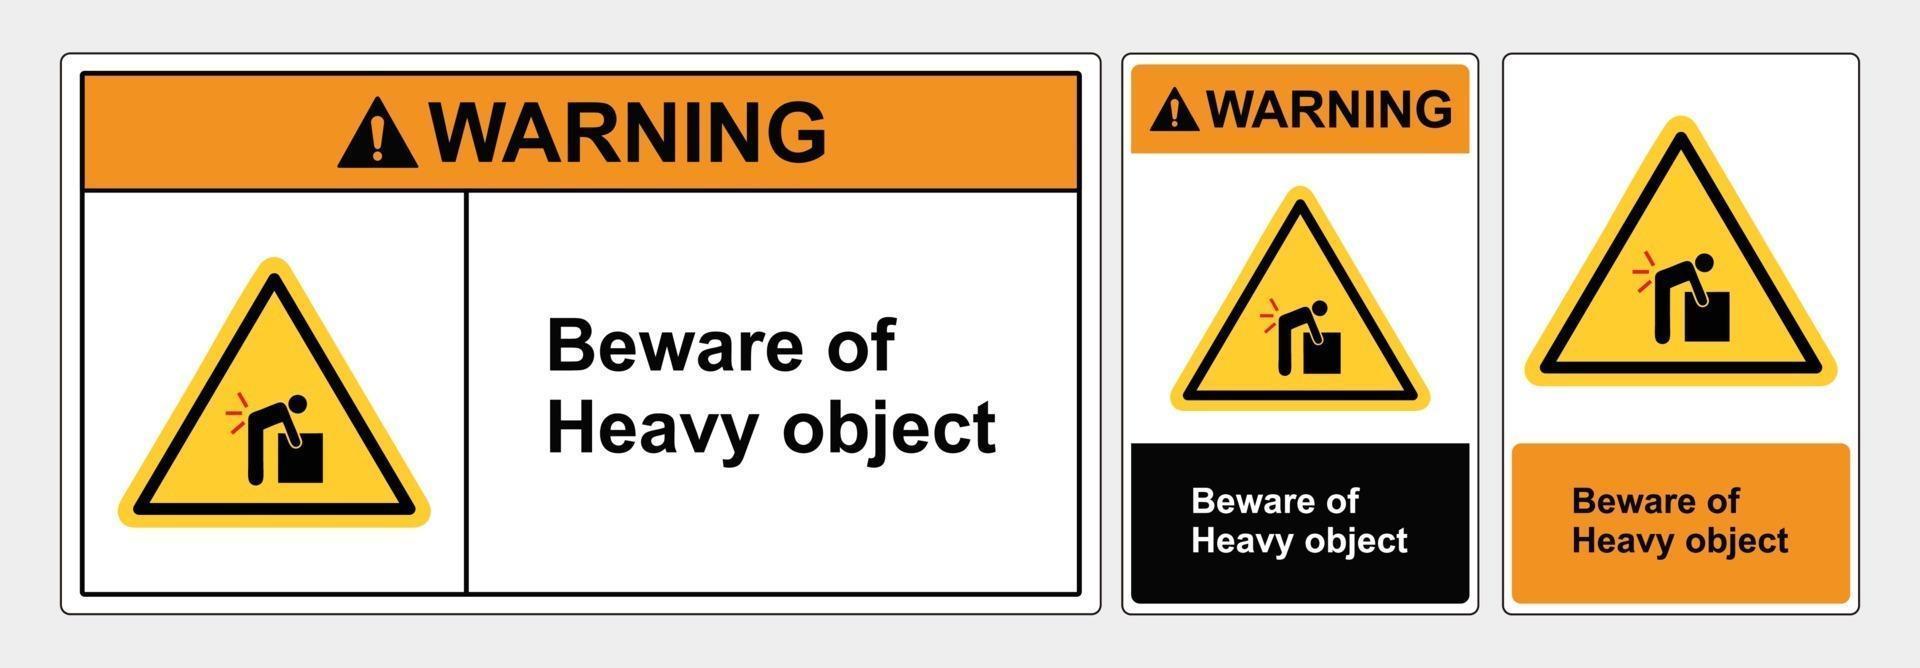 Safety sign beware of heavy object vector